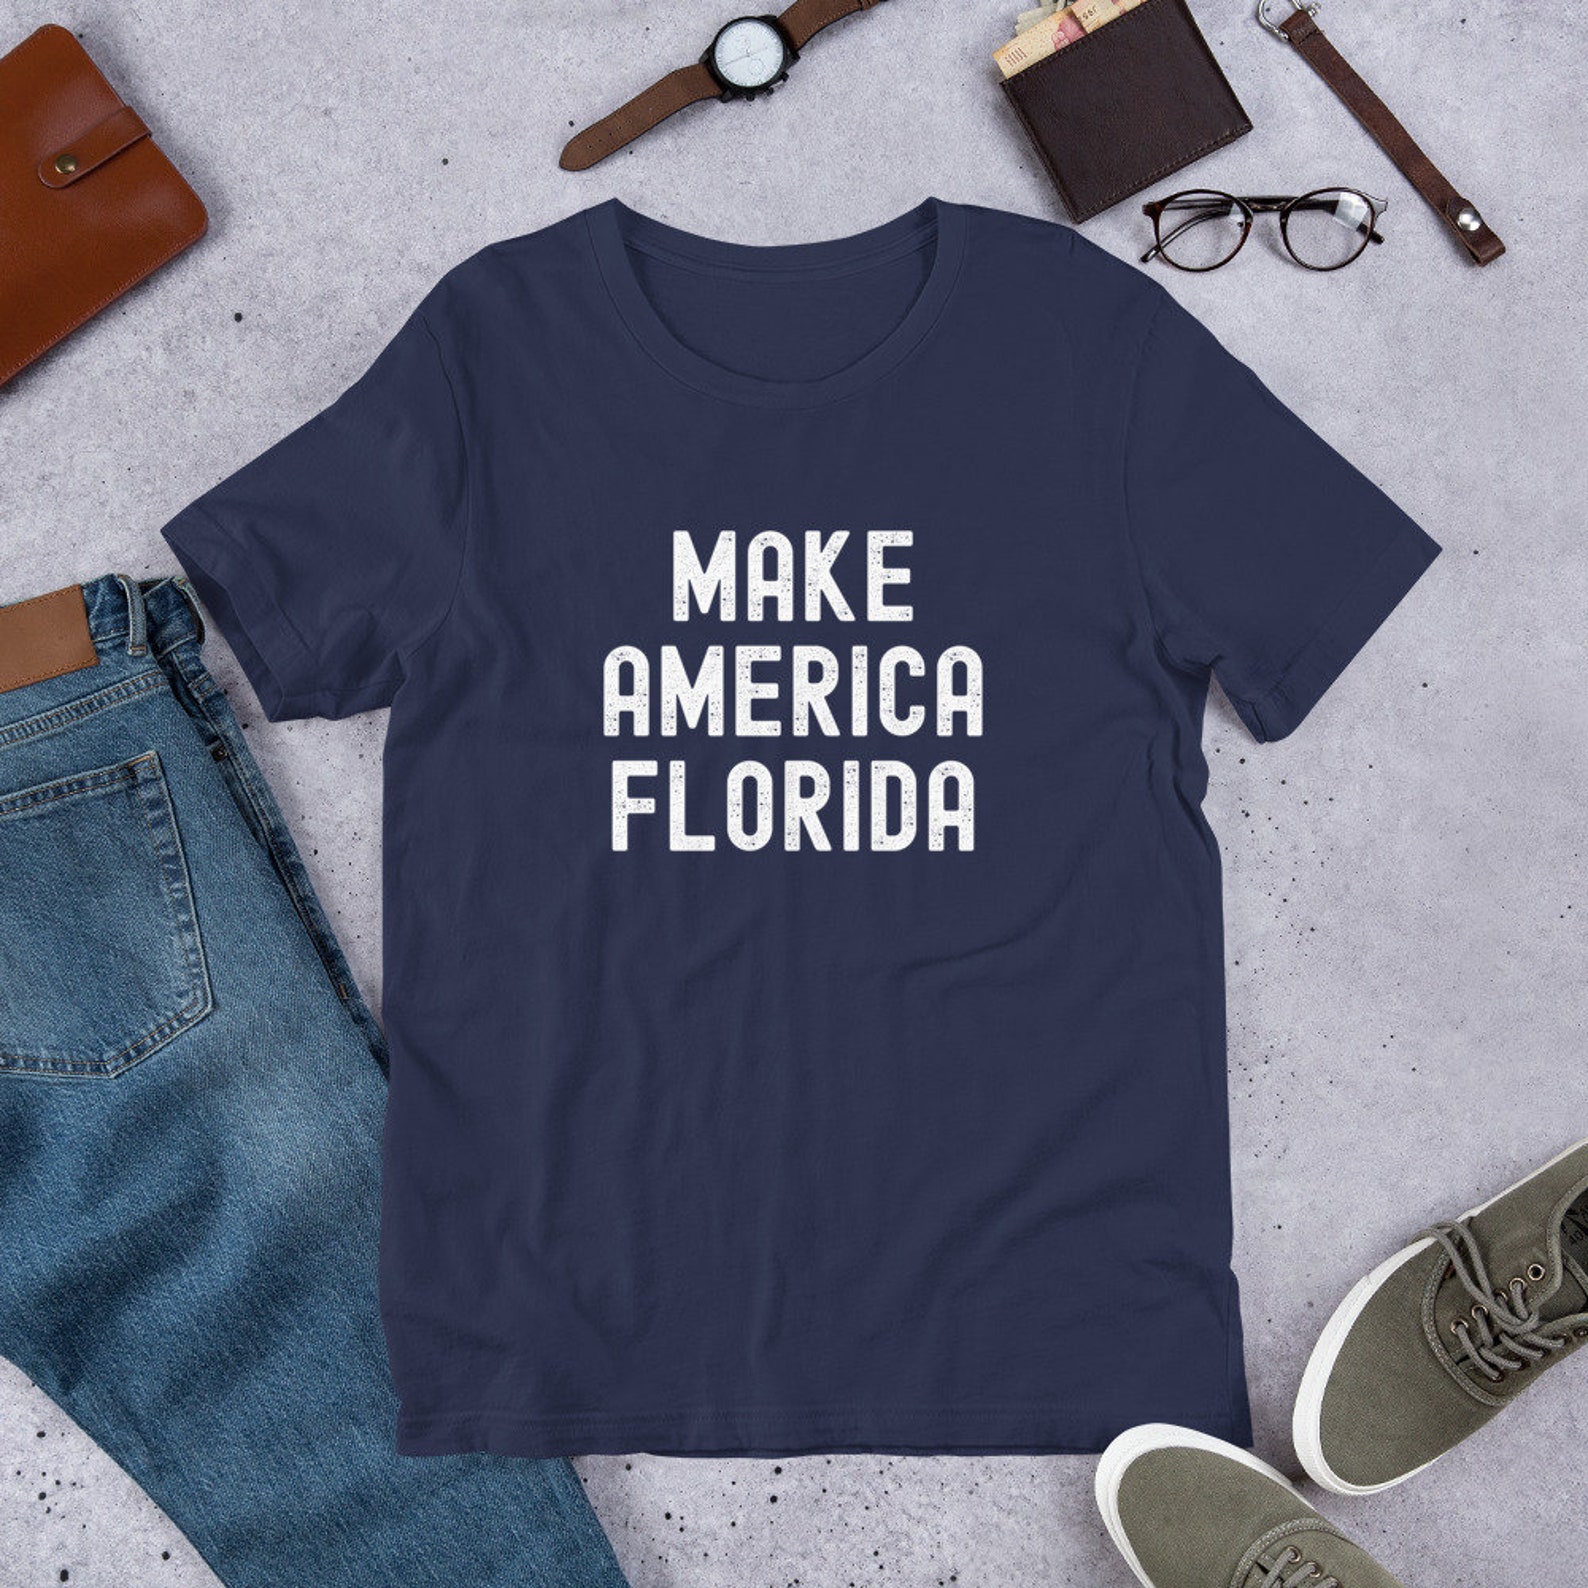 Make America Florida T-Shirt is Great for Men or Women to show | Etsy